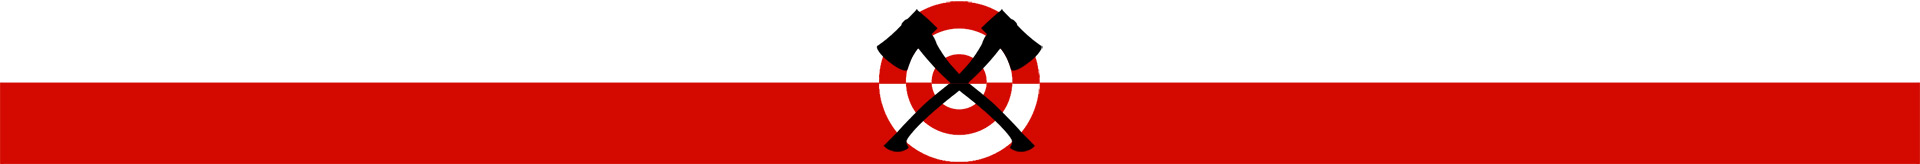 red and white spacer image with axes crossed over in middle of target